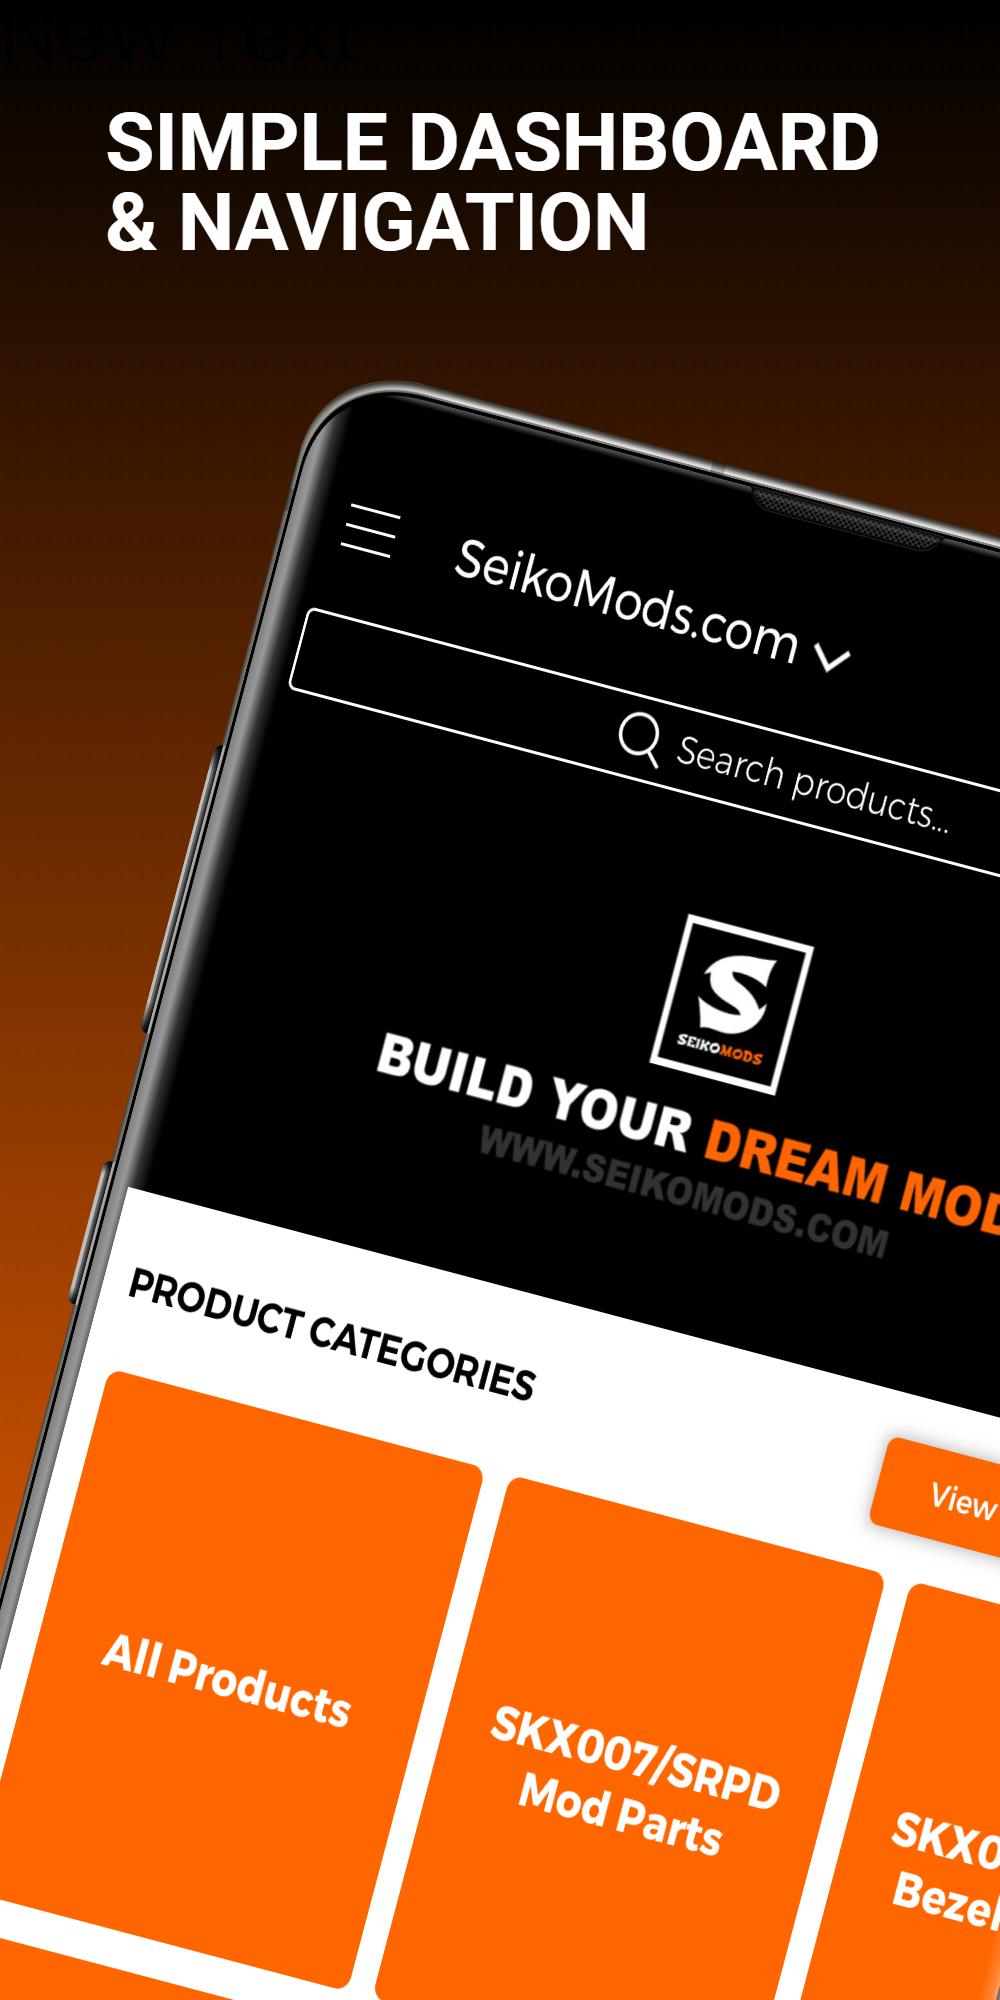 SeikoMods for Android - APK Download